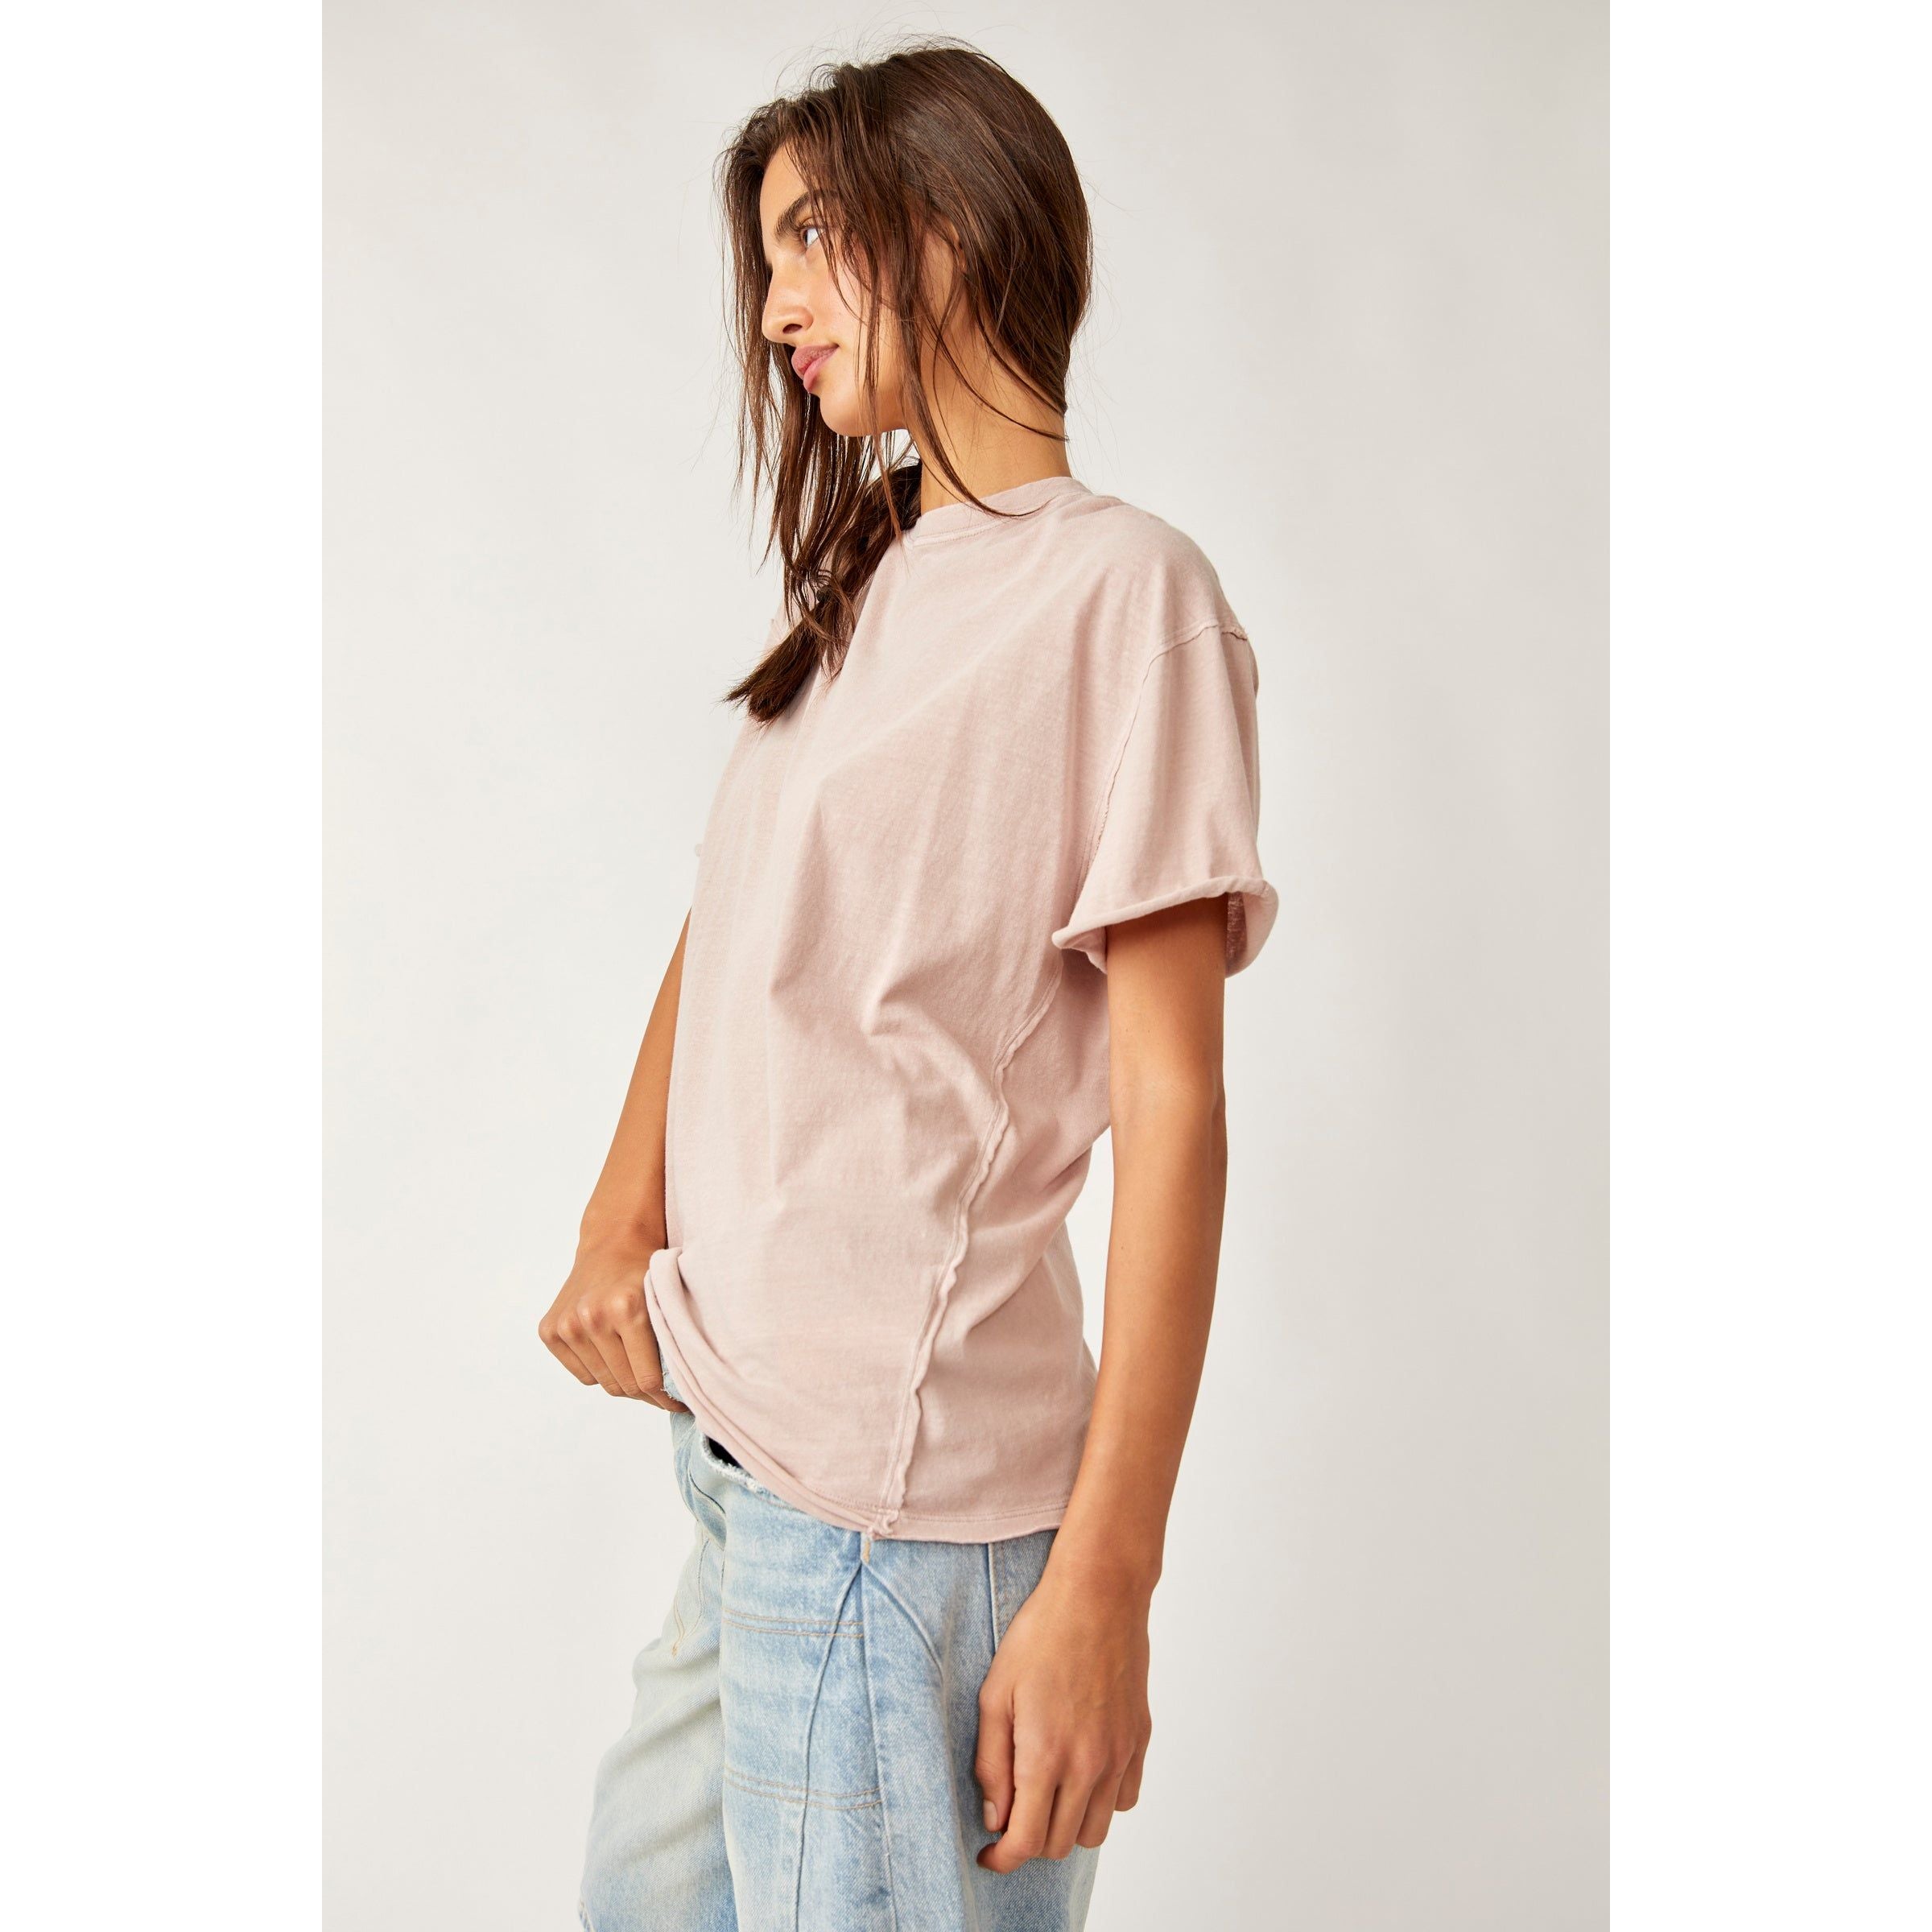 Free People - We The Free Nina Tee in Cashmere